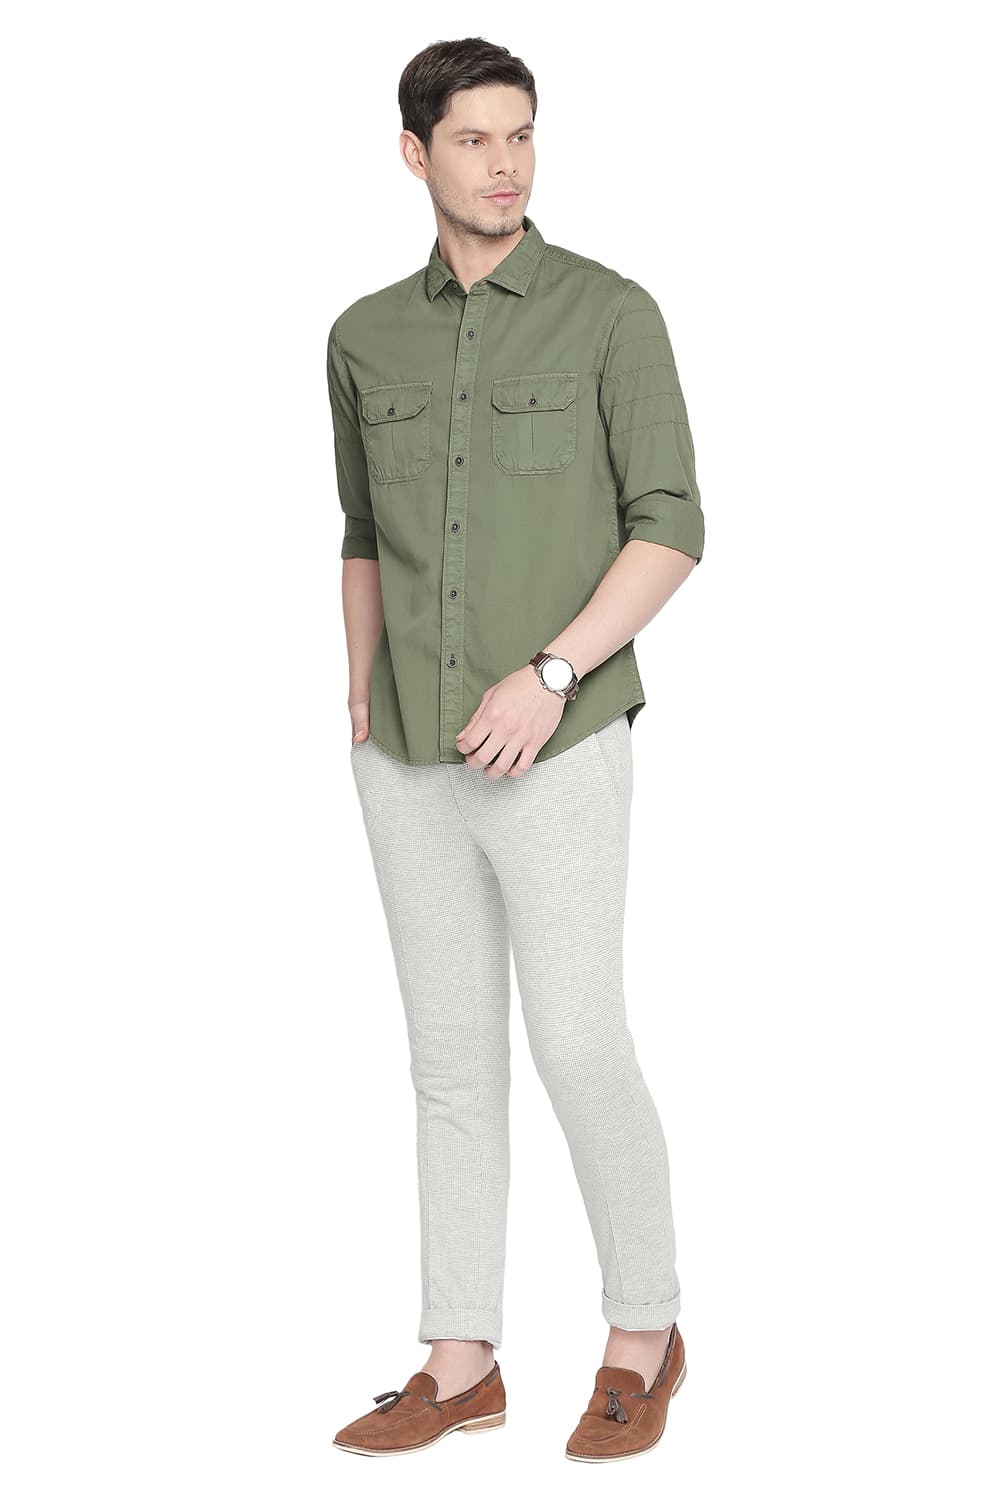 BASICS TAPERED FIT KNIT TROUSER